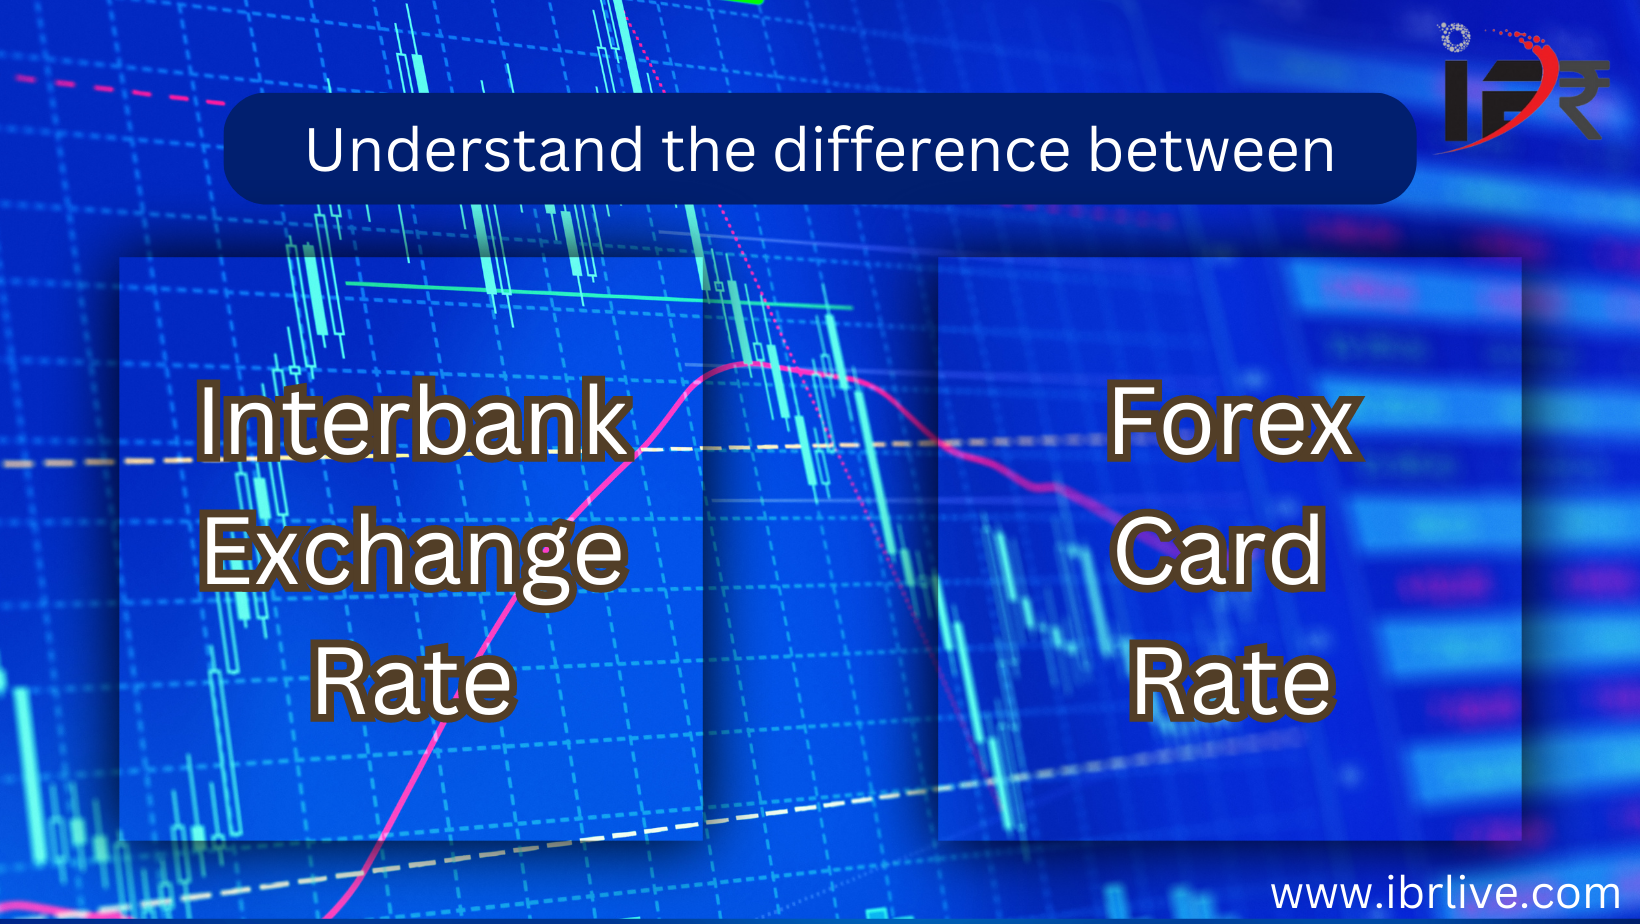 Understand the difference between IBR rate and Forex Card Rate